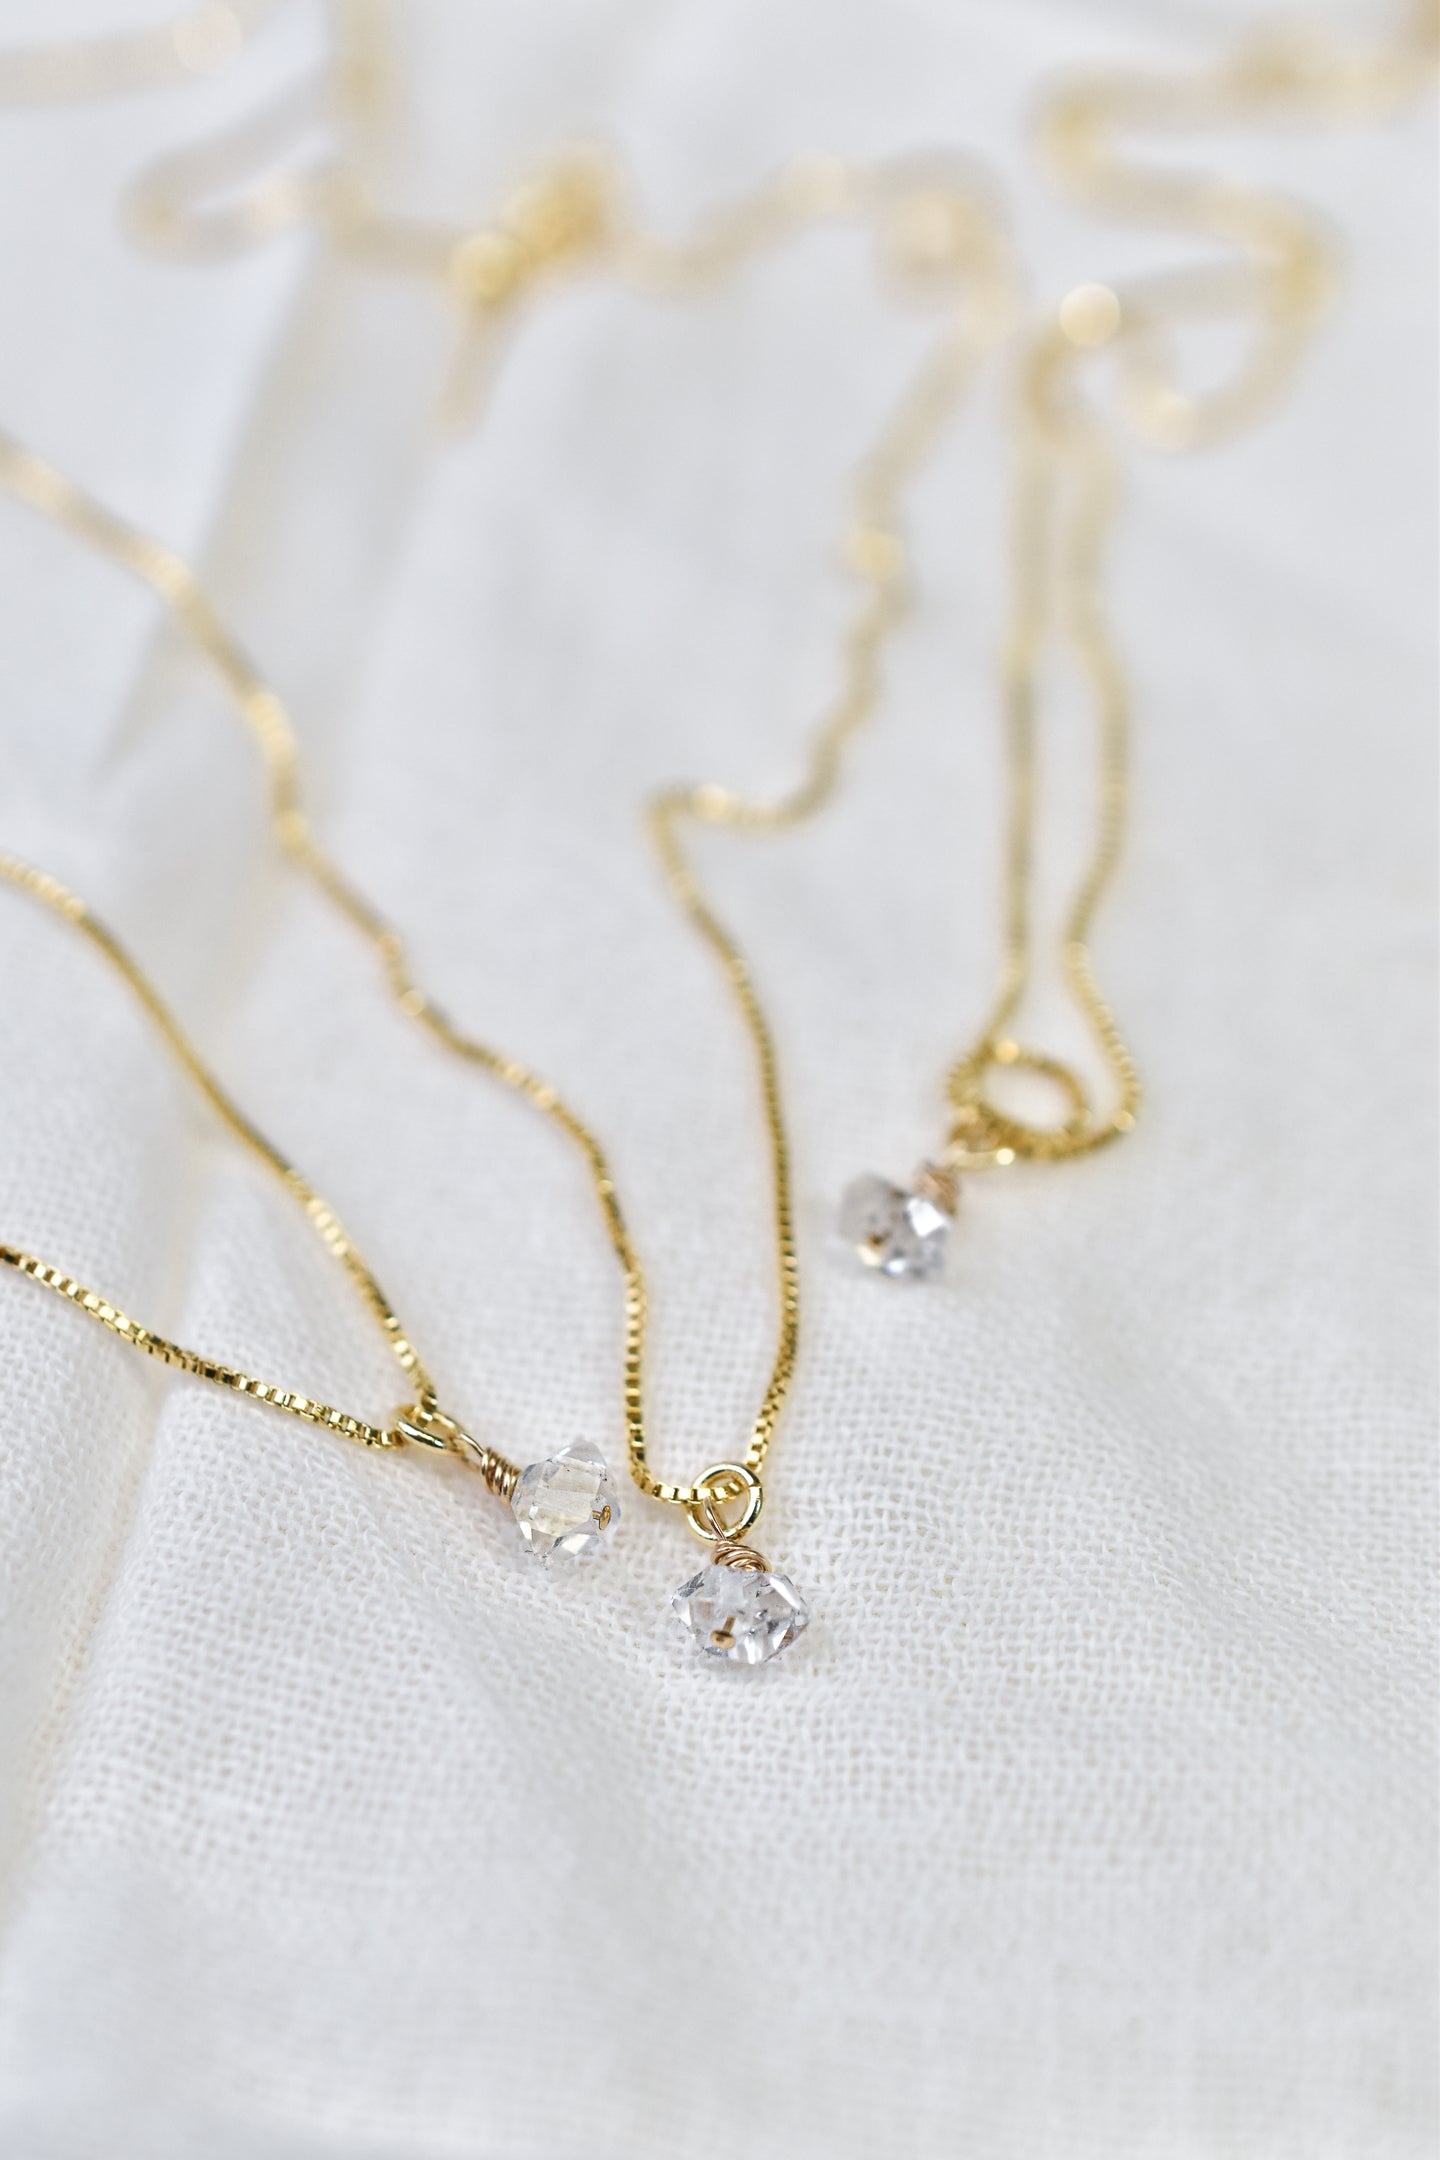 Herkimer Diamond Necklace - Gold-Filled Adjustable Chain